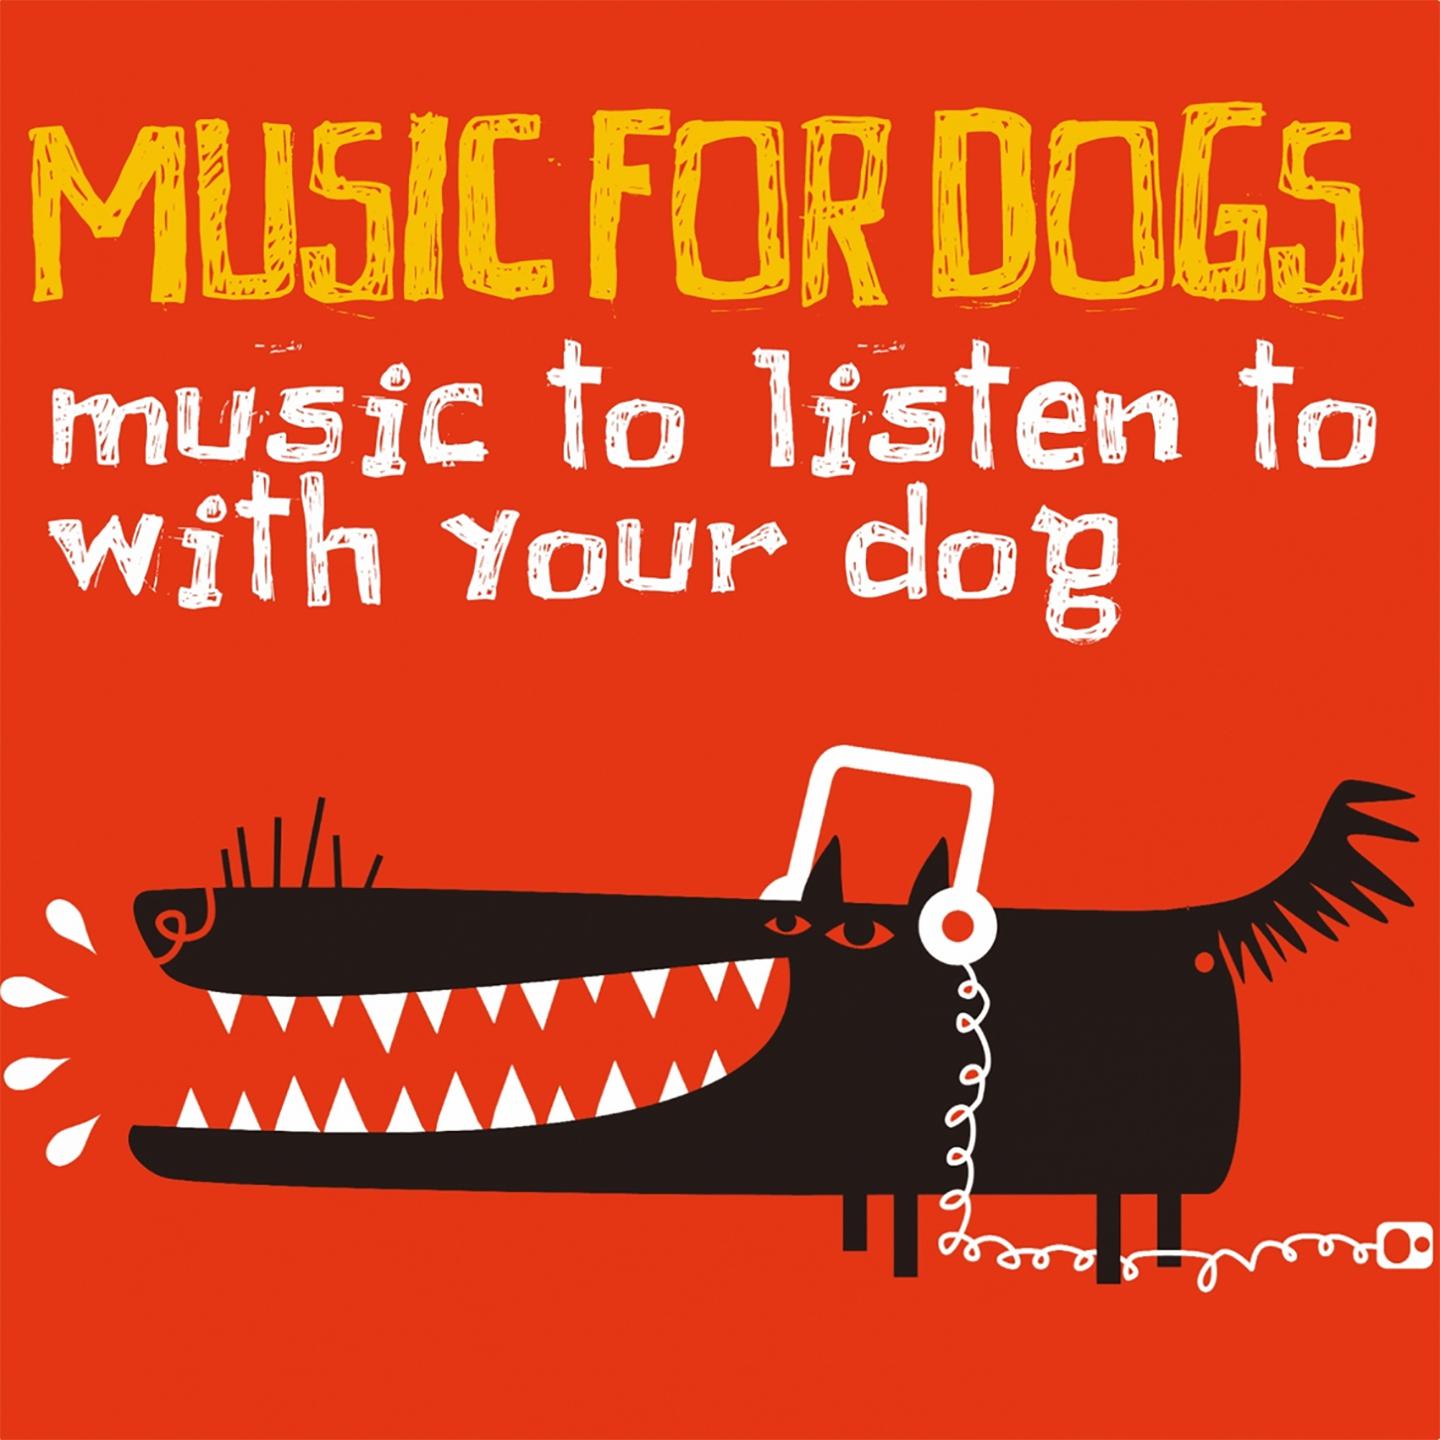 Music for Dogs (Music to Listen to with Your Dogs)